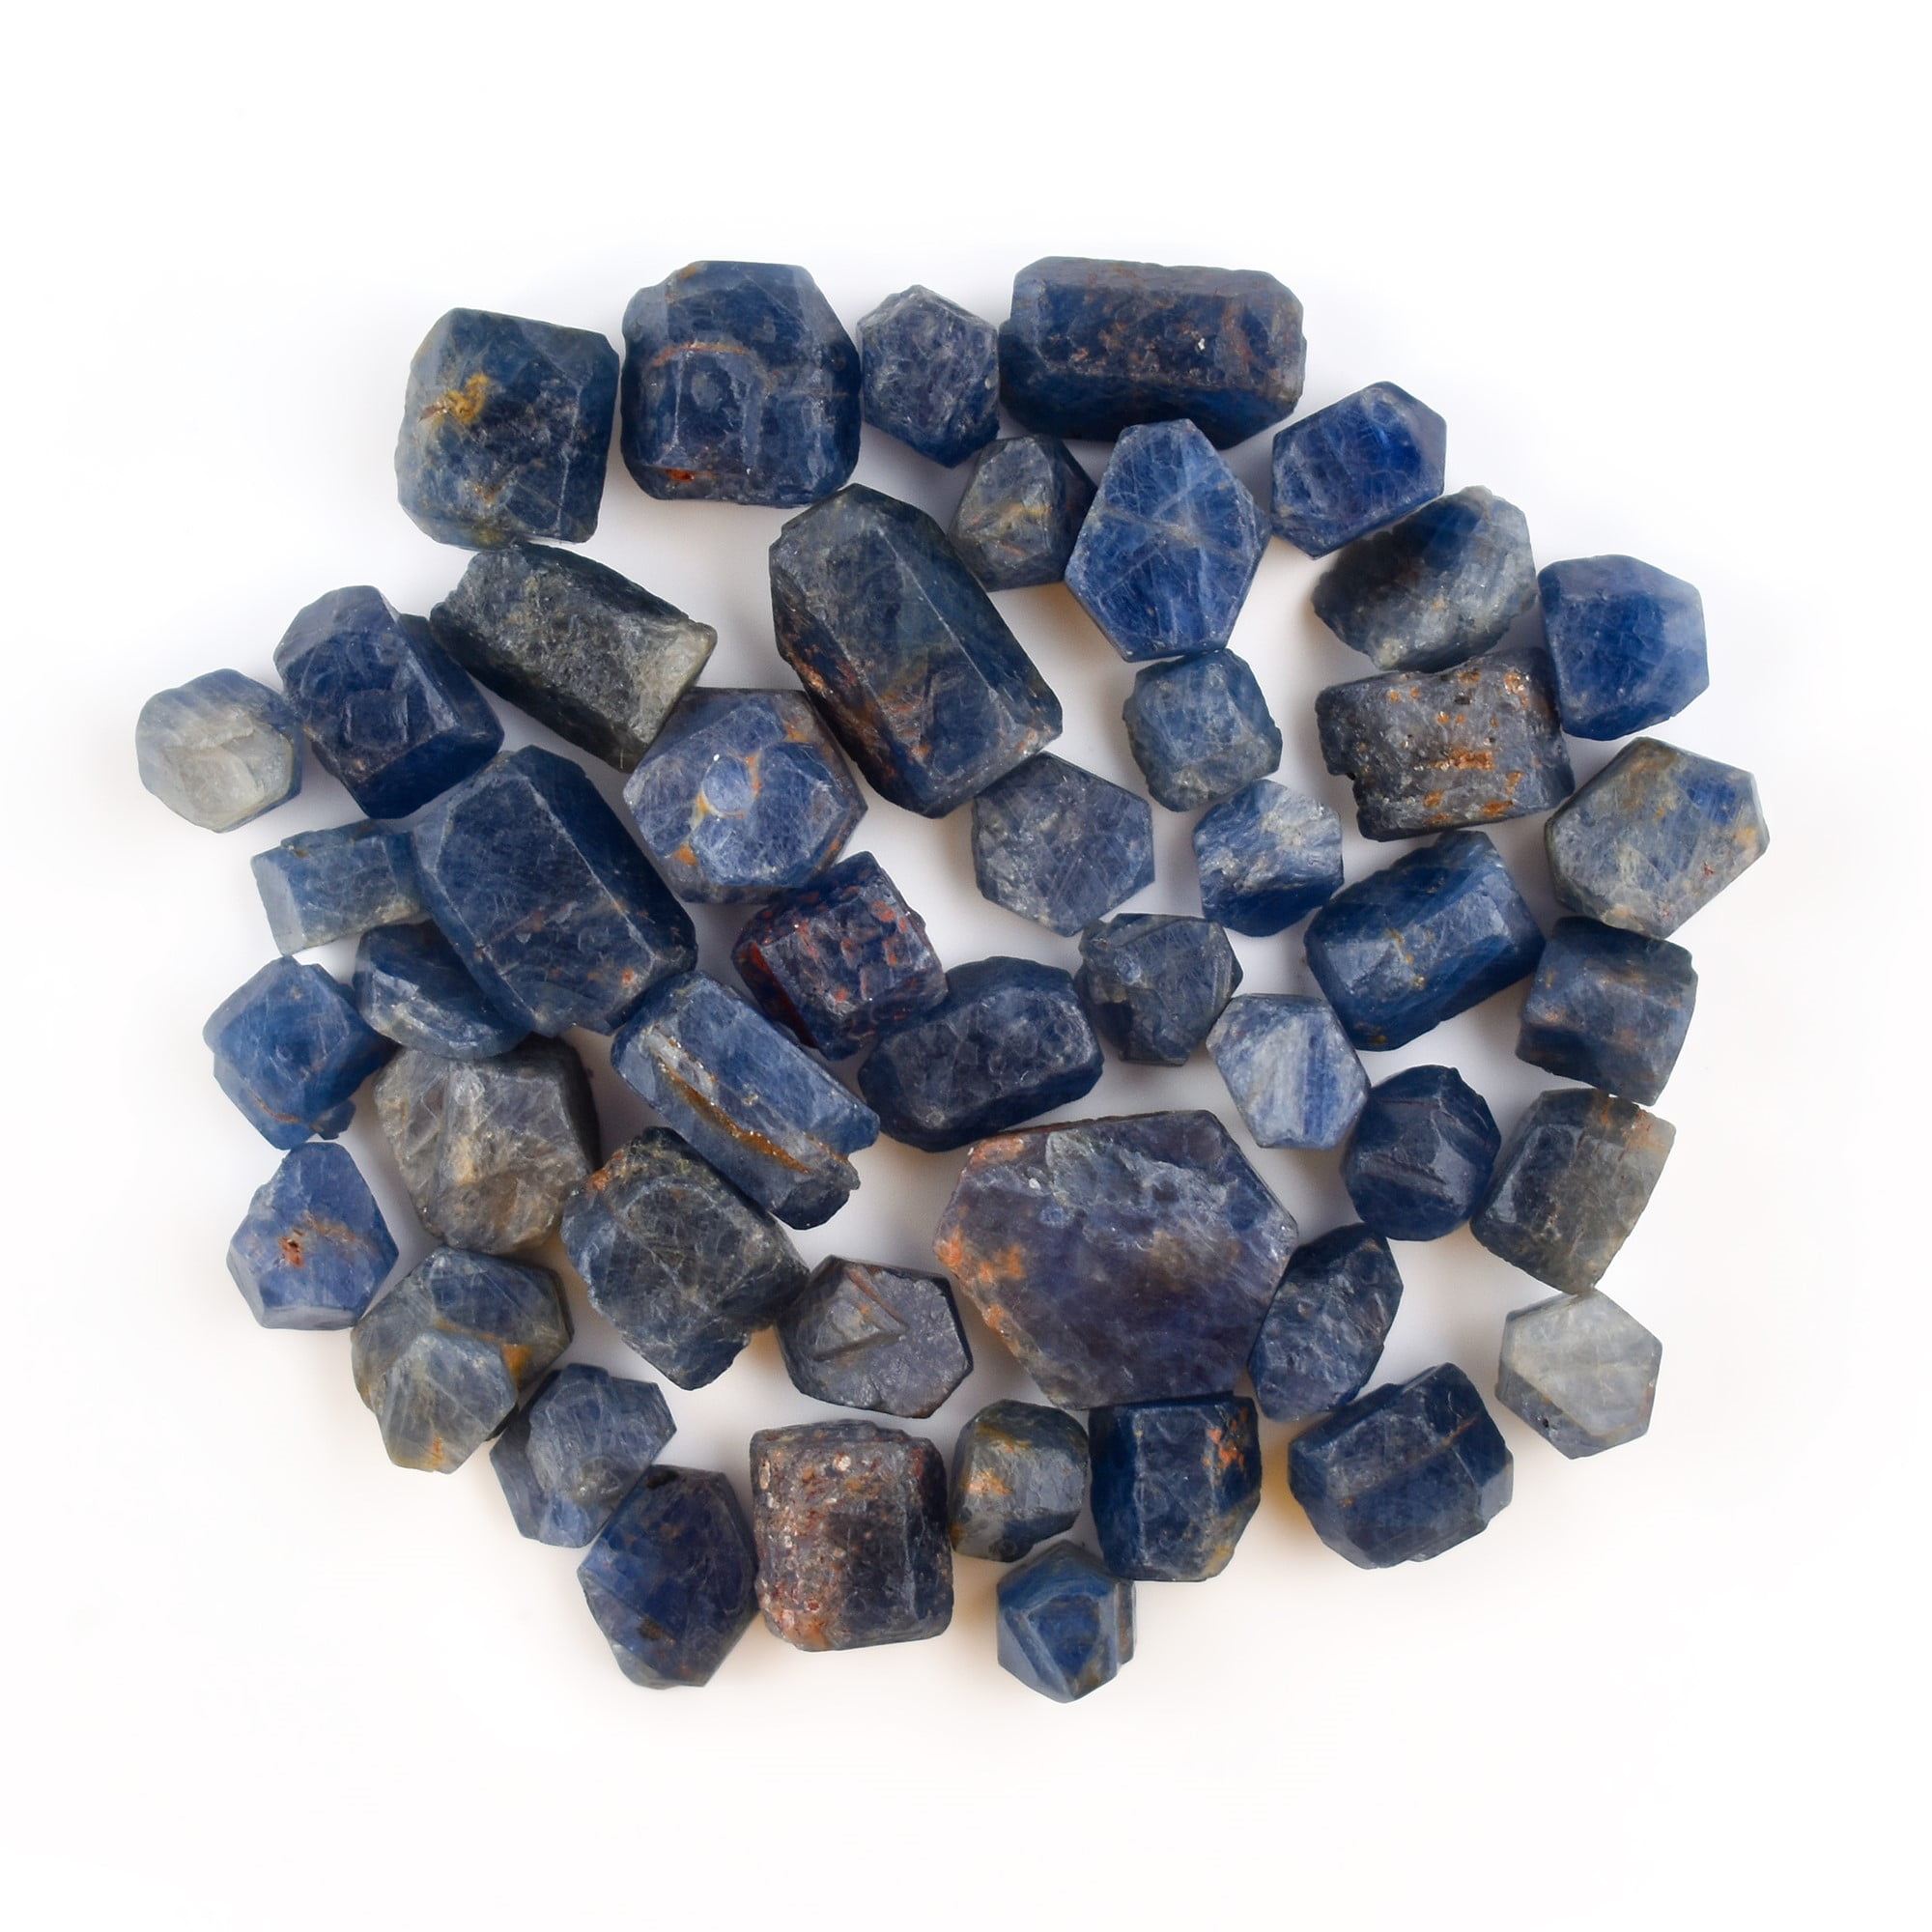 Raw Blue SAPPHIRE Crystal Chips Small Crystals, Birthstones, Gemstones,  Jewelry Making, Raw Rocks and Minerals, E1519 